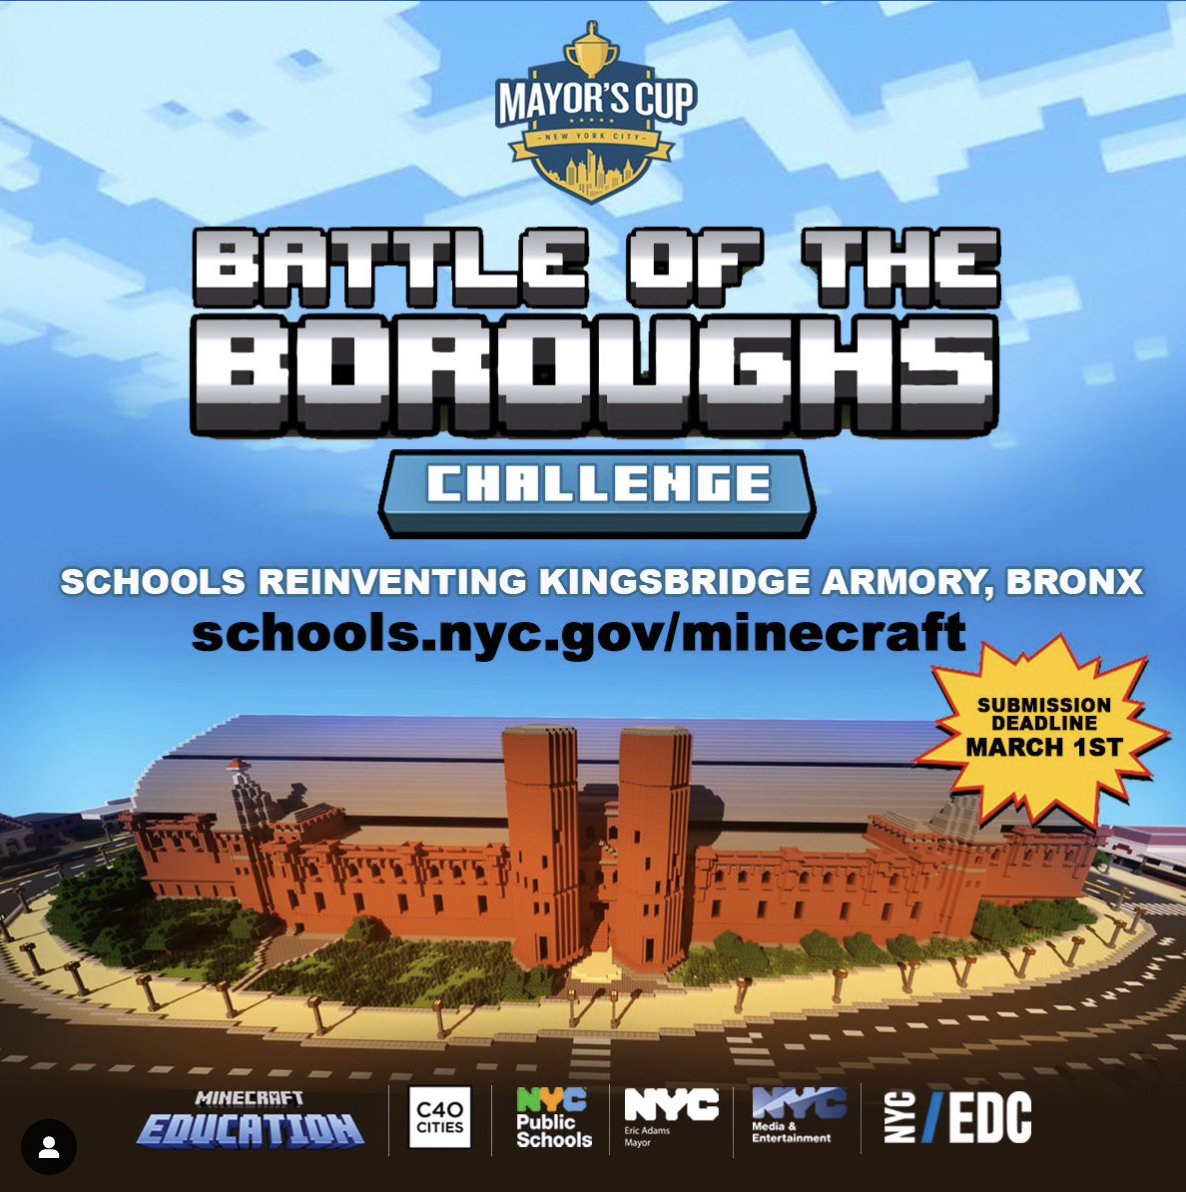 schools.nyc.gov/Minecraft SUBMISSION DEADLINE March 1 🚨 Got what it takes to become #NYC #Minecraft #BattleoftheBoroughs #MayorsCup Champions?! SIGN UP! #GameBasedLearning #Esports #ProjectBasedLearning #PublicEducation #GameOn #creativecoders